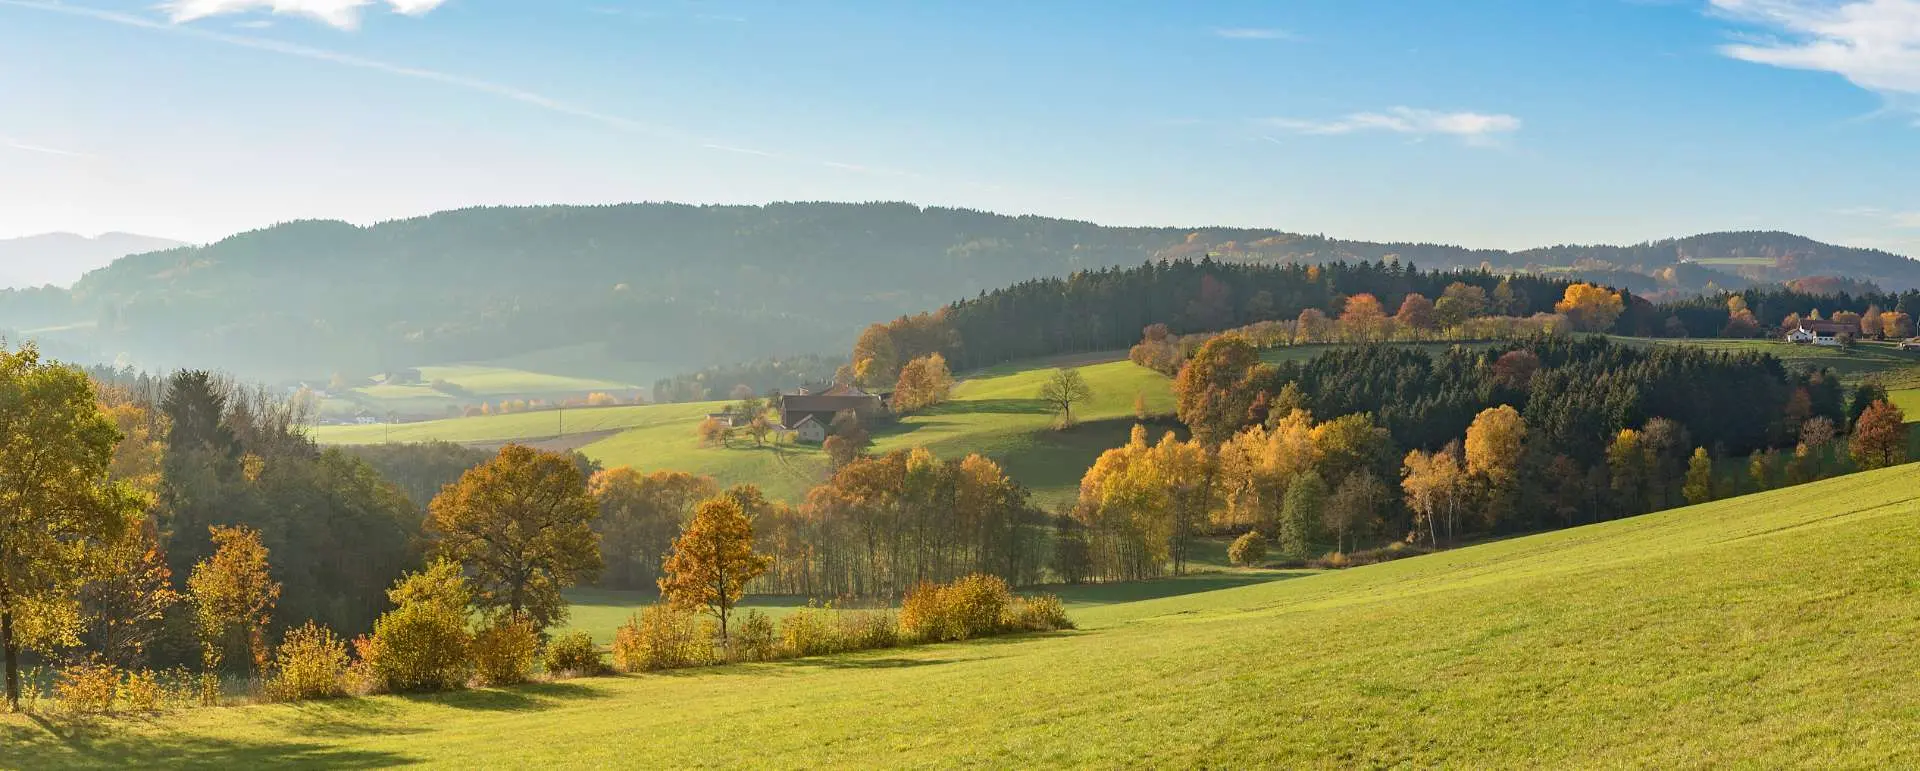 Lower Bavaria - The preferred choice for workshop hotels